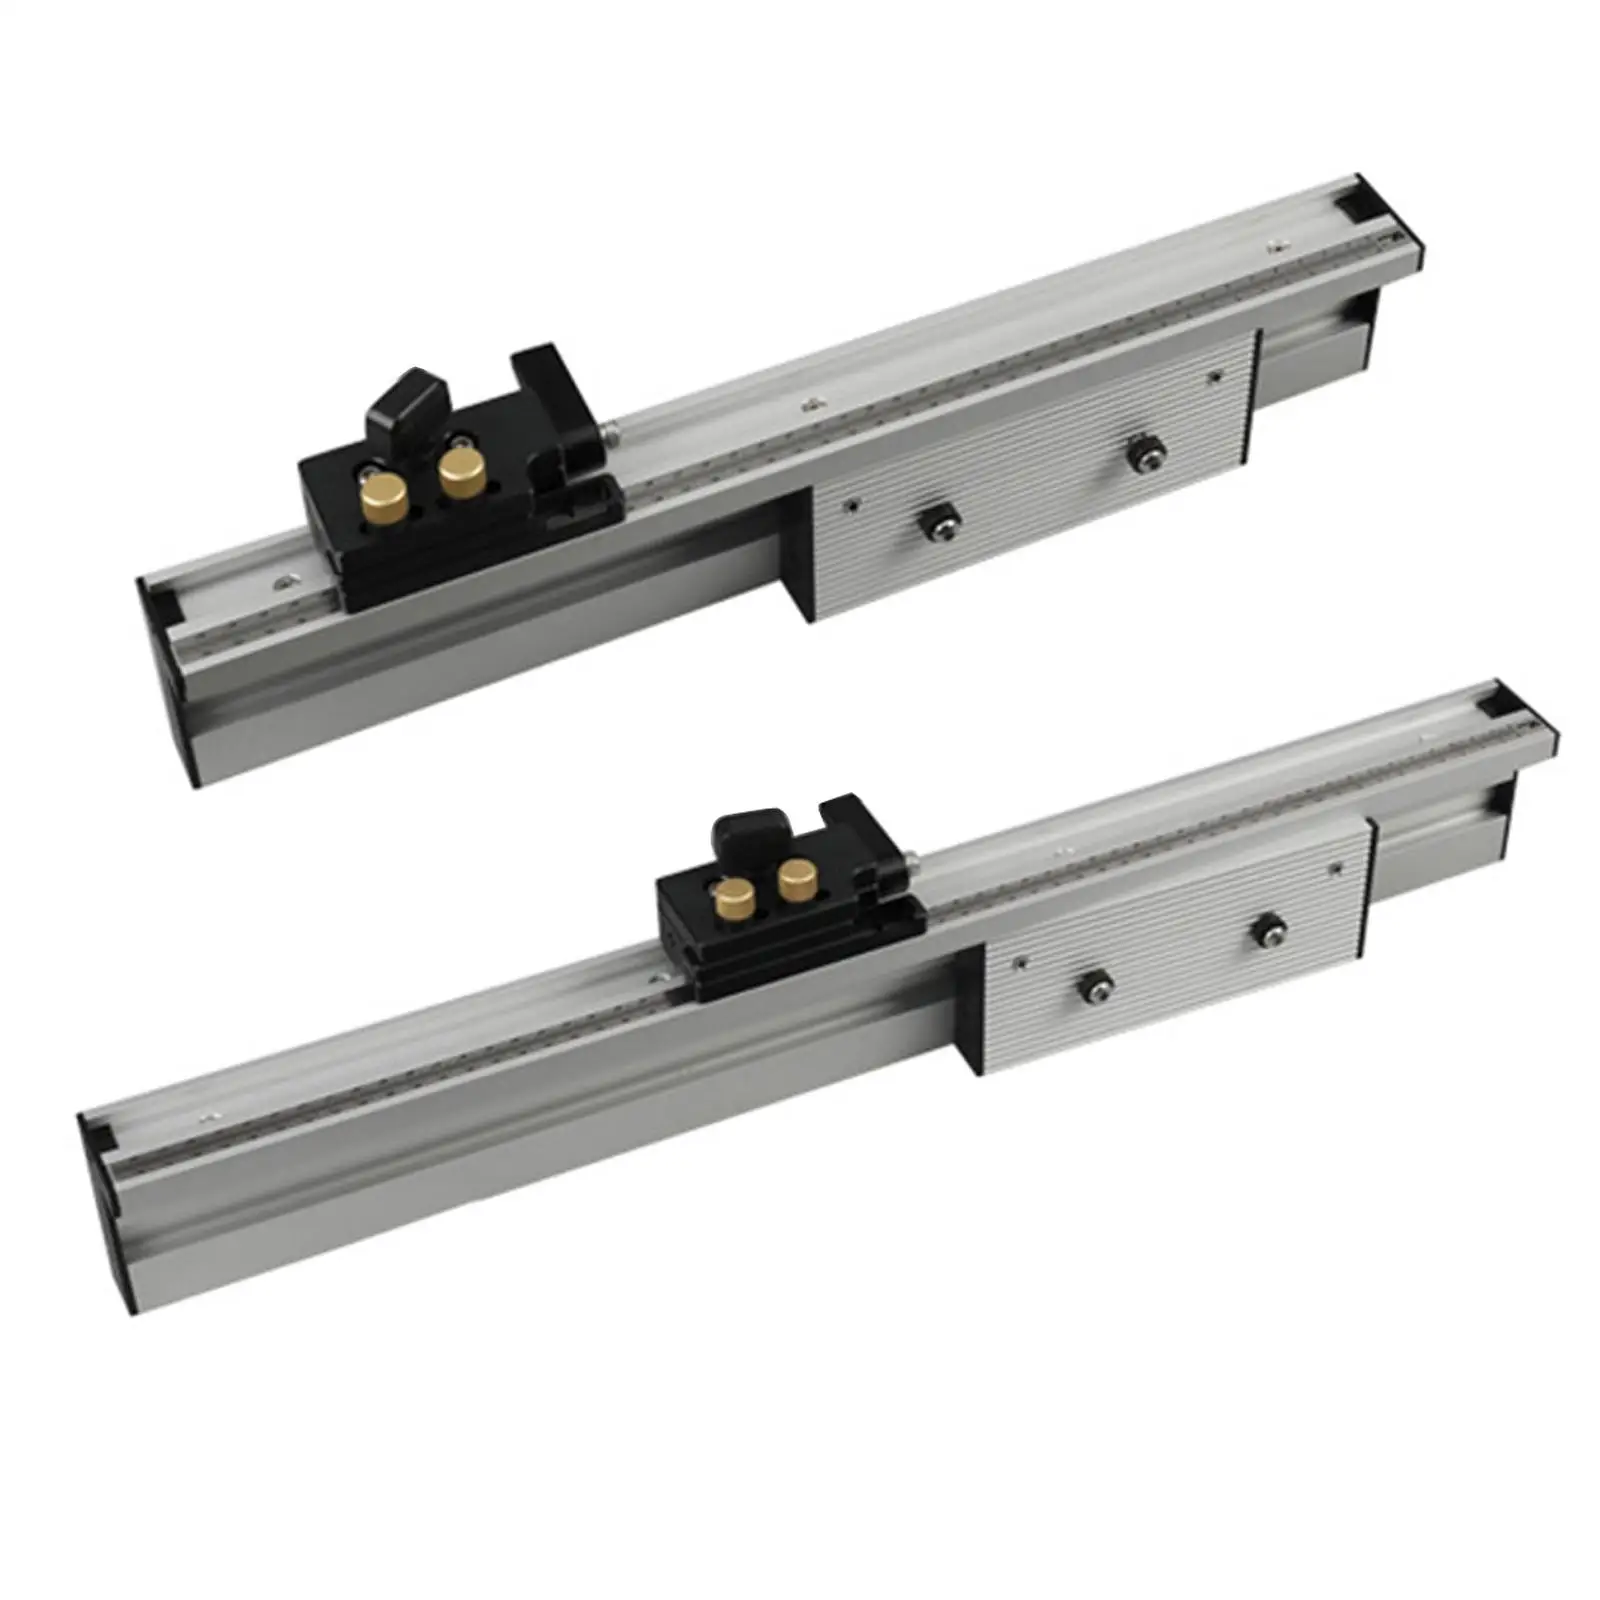 Precision Aluminium Profile Fence Sliding Brackets with Movable/Fixed Scale